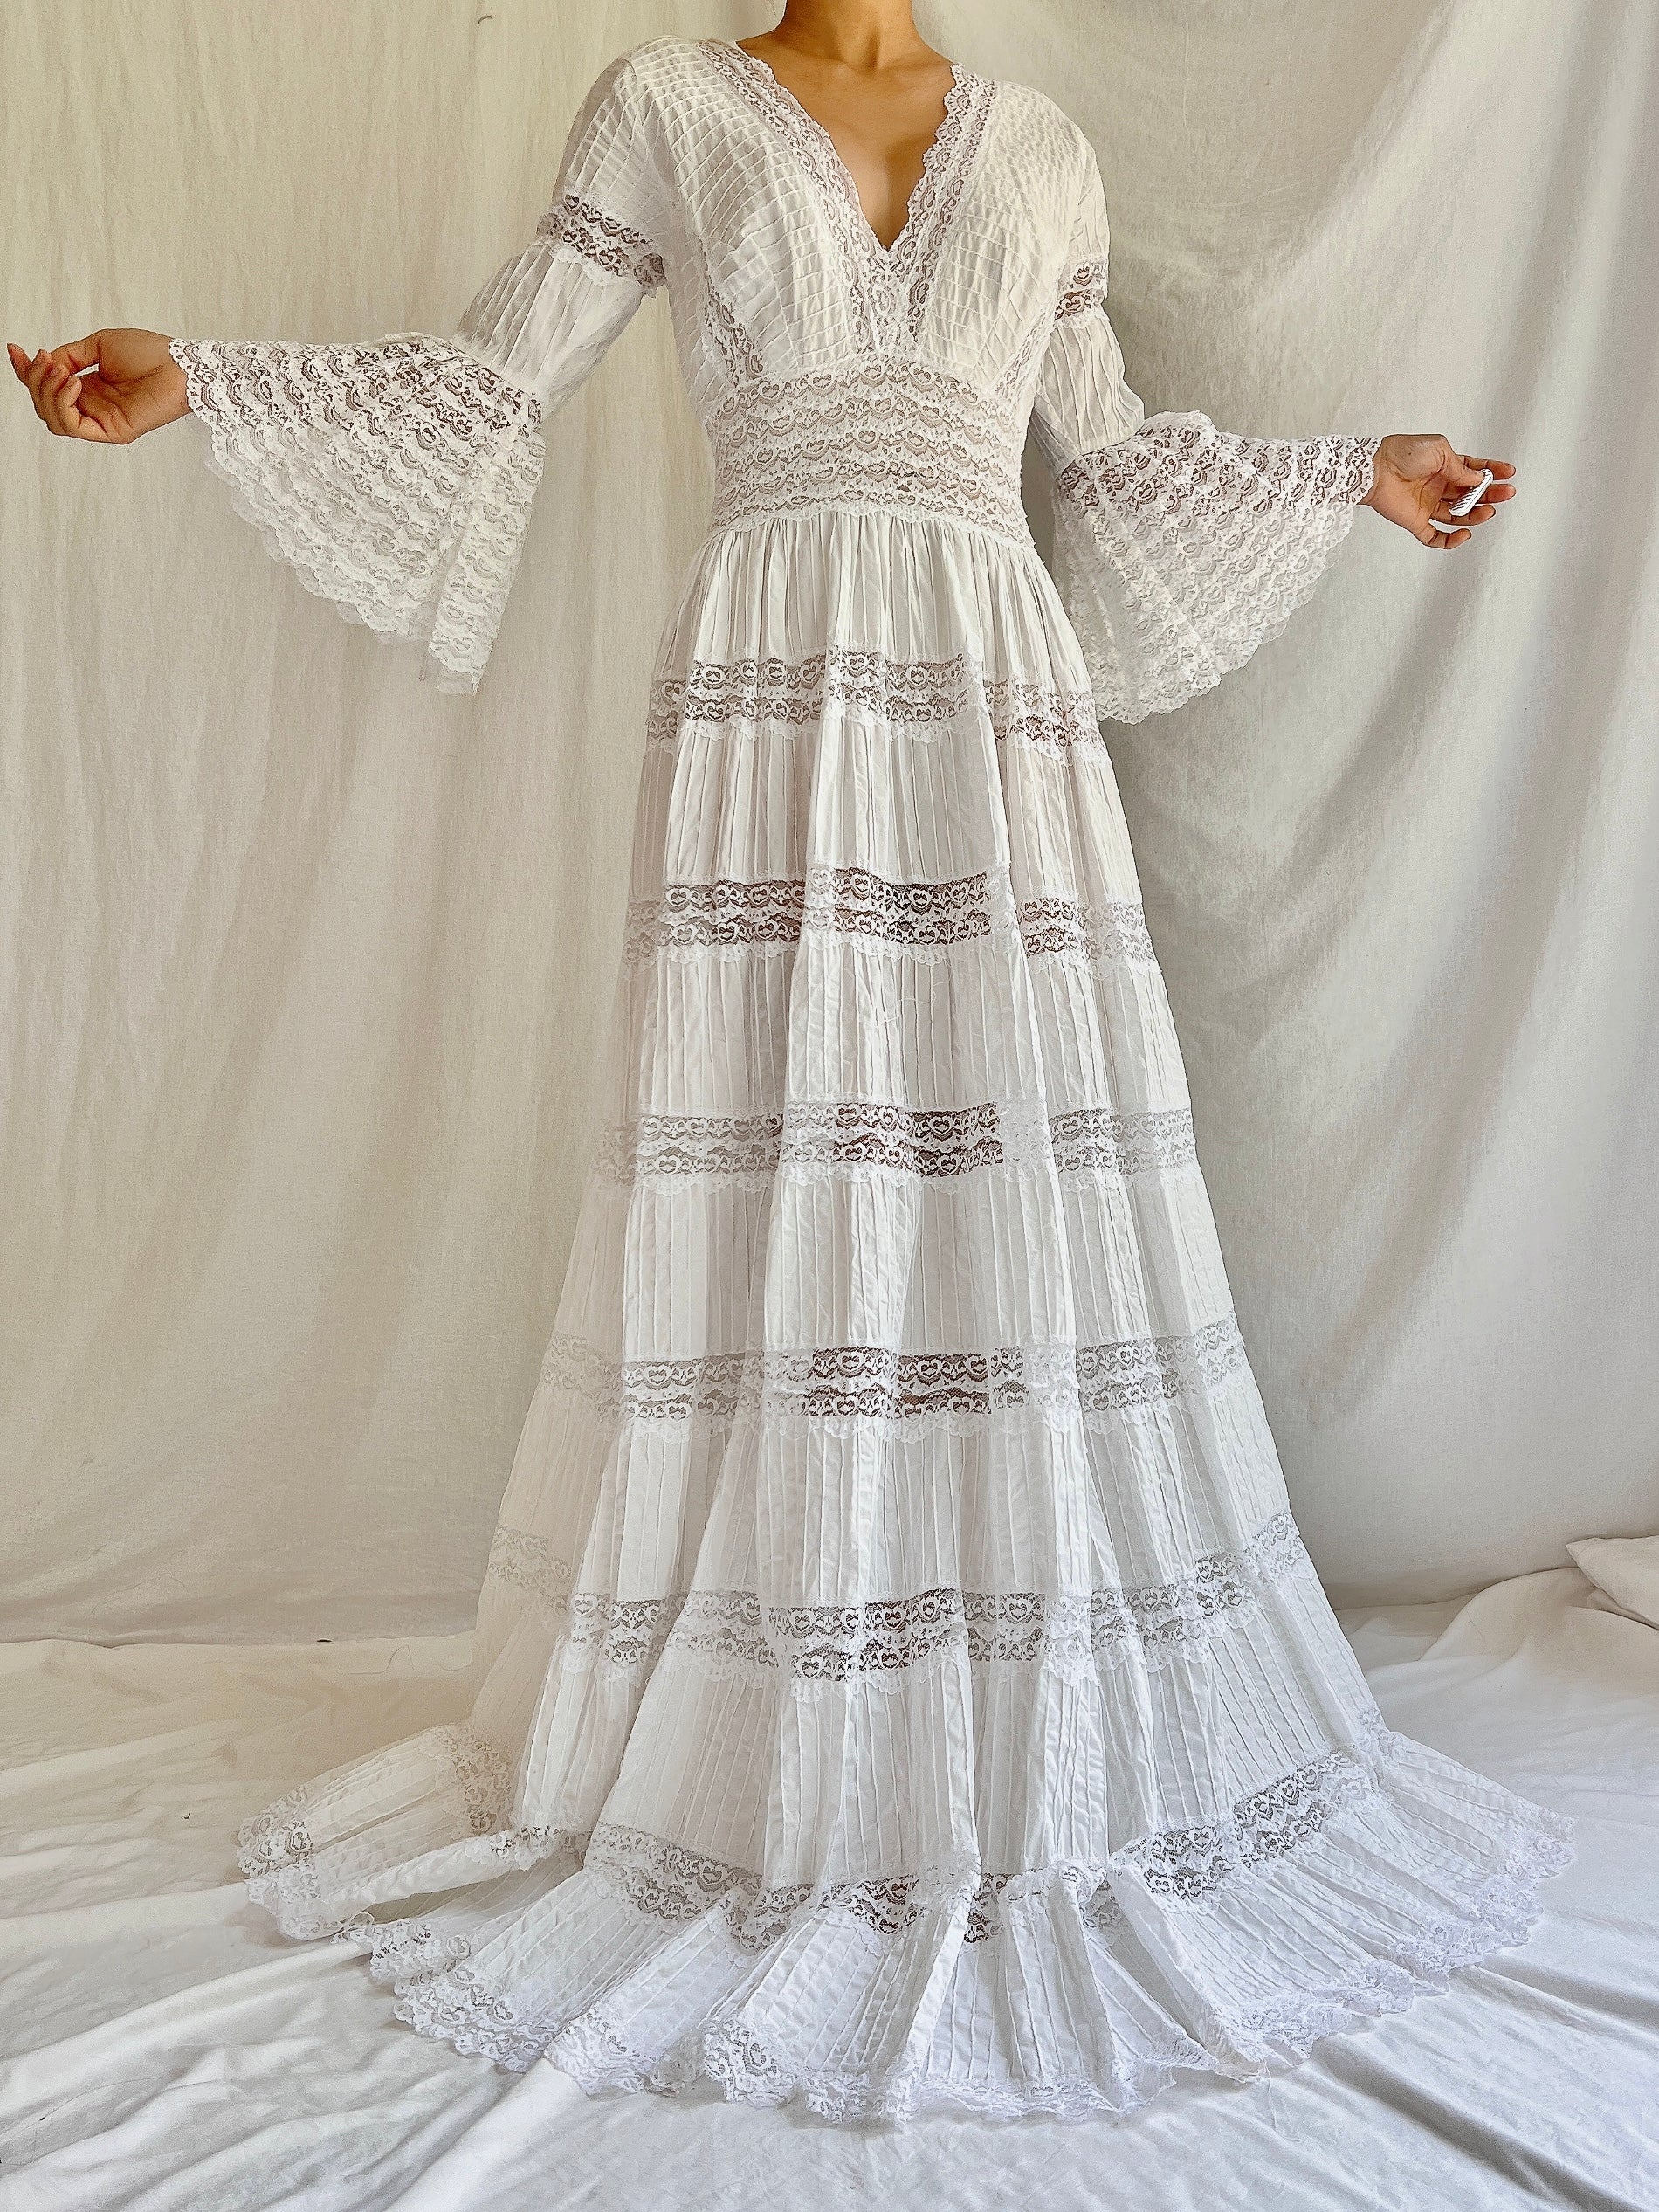 1979s White Lace Bell Sleeves Pintucked Gown - S